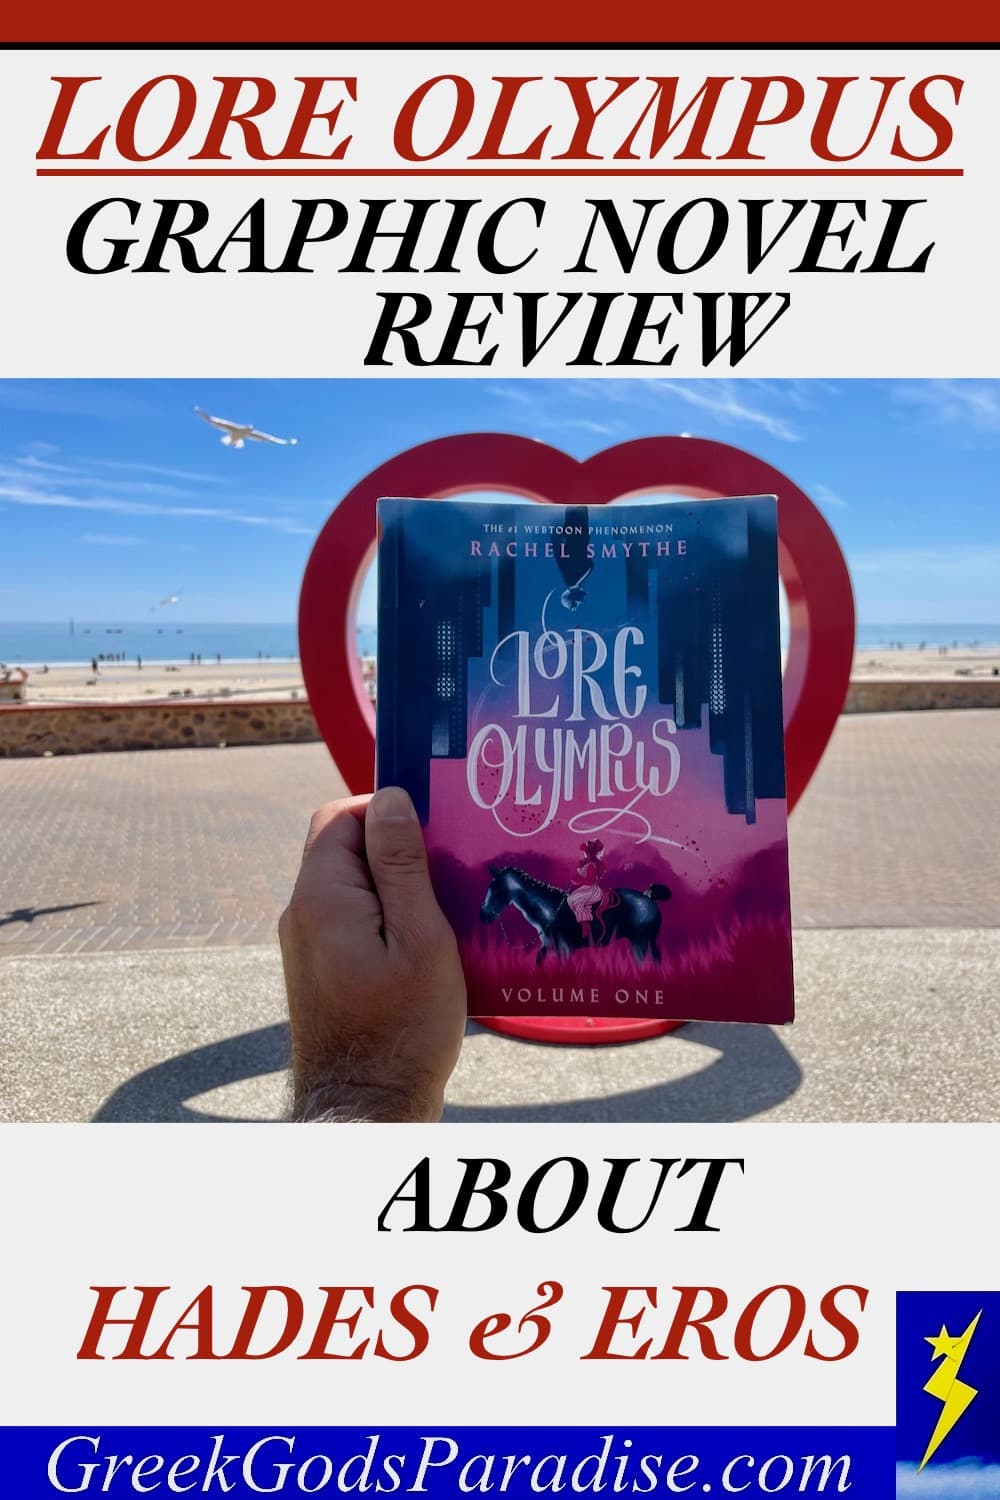 Lore Olympus Graphic Novel Review about Hades and Eros